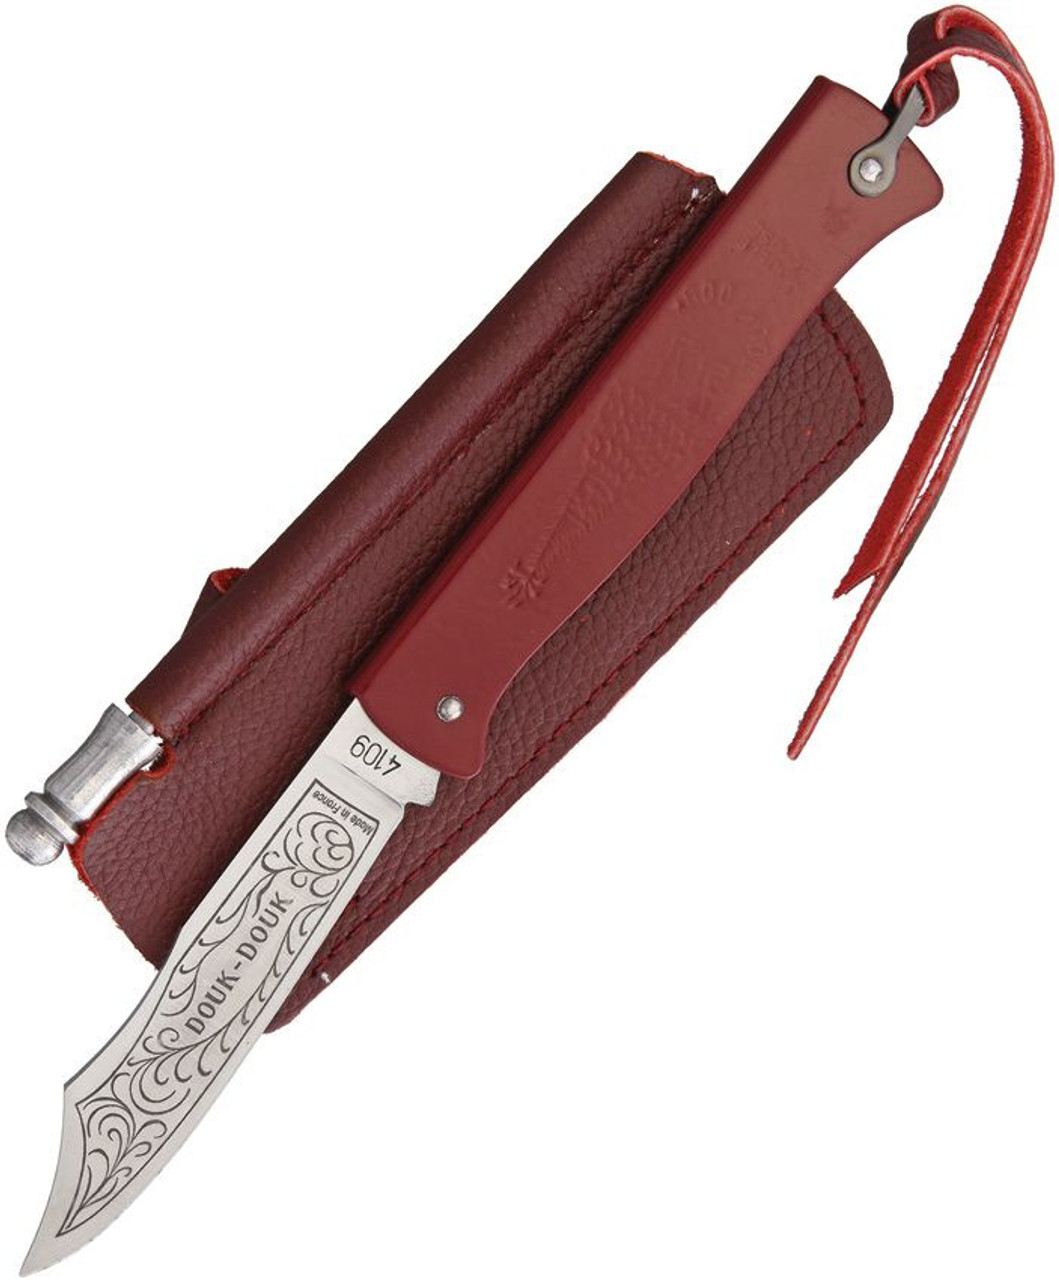 Douk-Douk Slip Joint Folder (DD815GMCOLR) 3.13" Hight Carbon Steel Satin Clip Point Blade, Red Stainless Steel Handle, Red Leather Pouch with Sharpening Rod